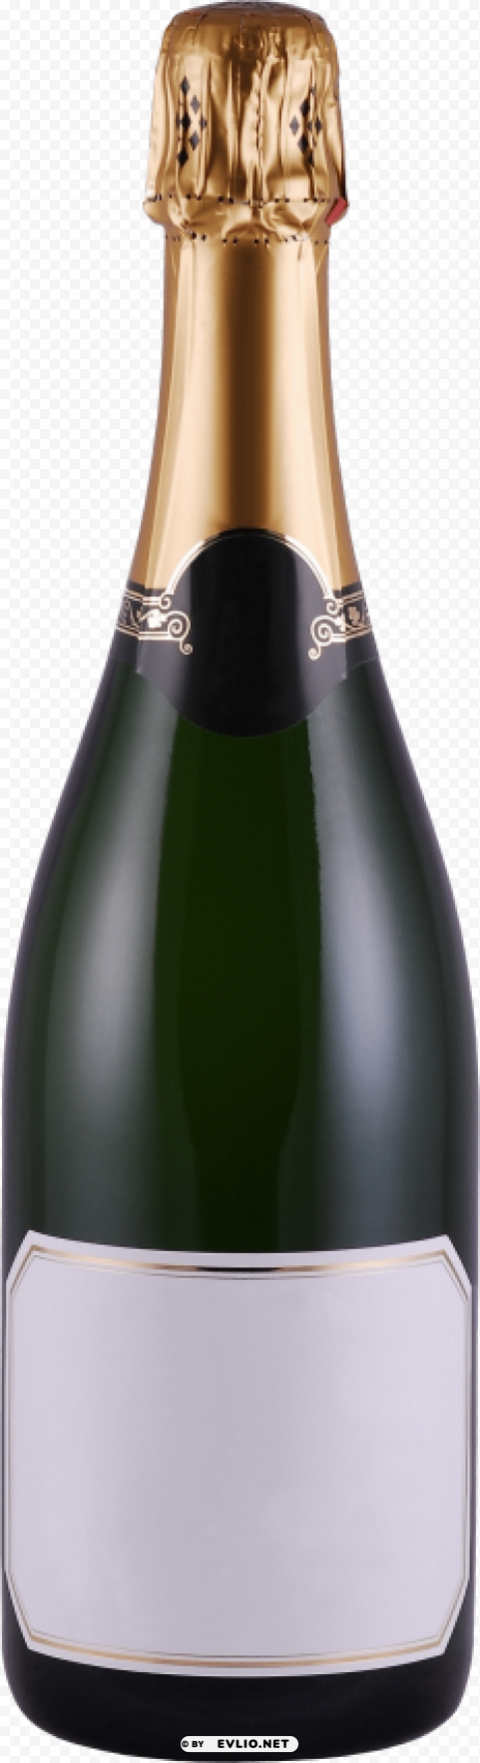 sparkling wine from a bottle Transparent background PNG stock